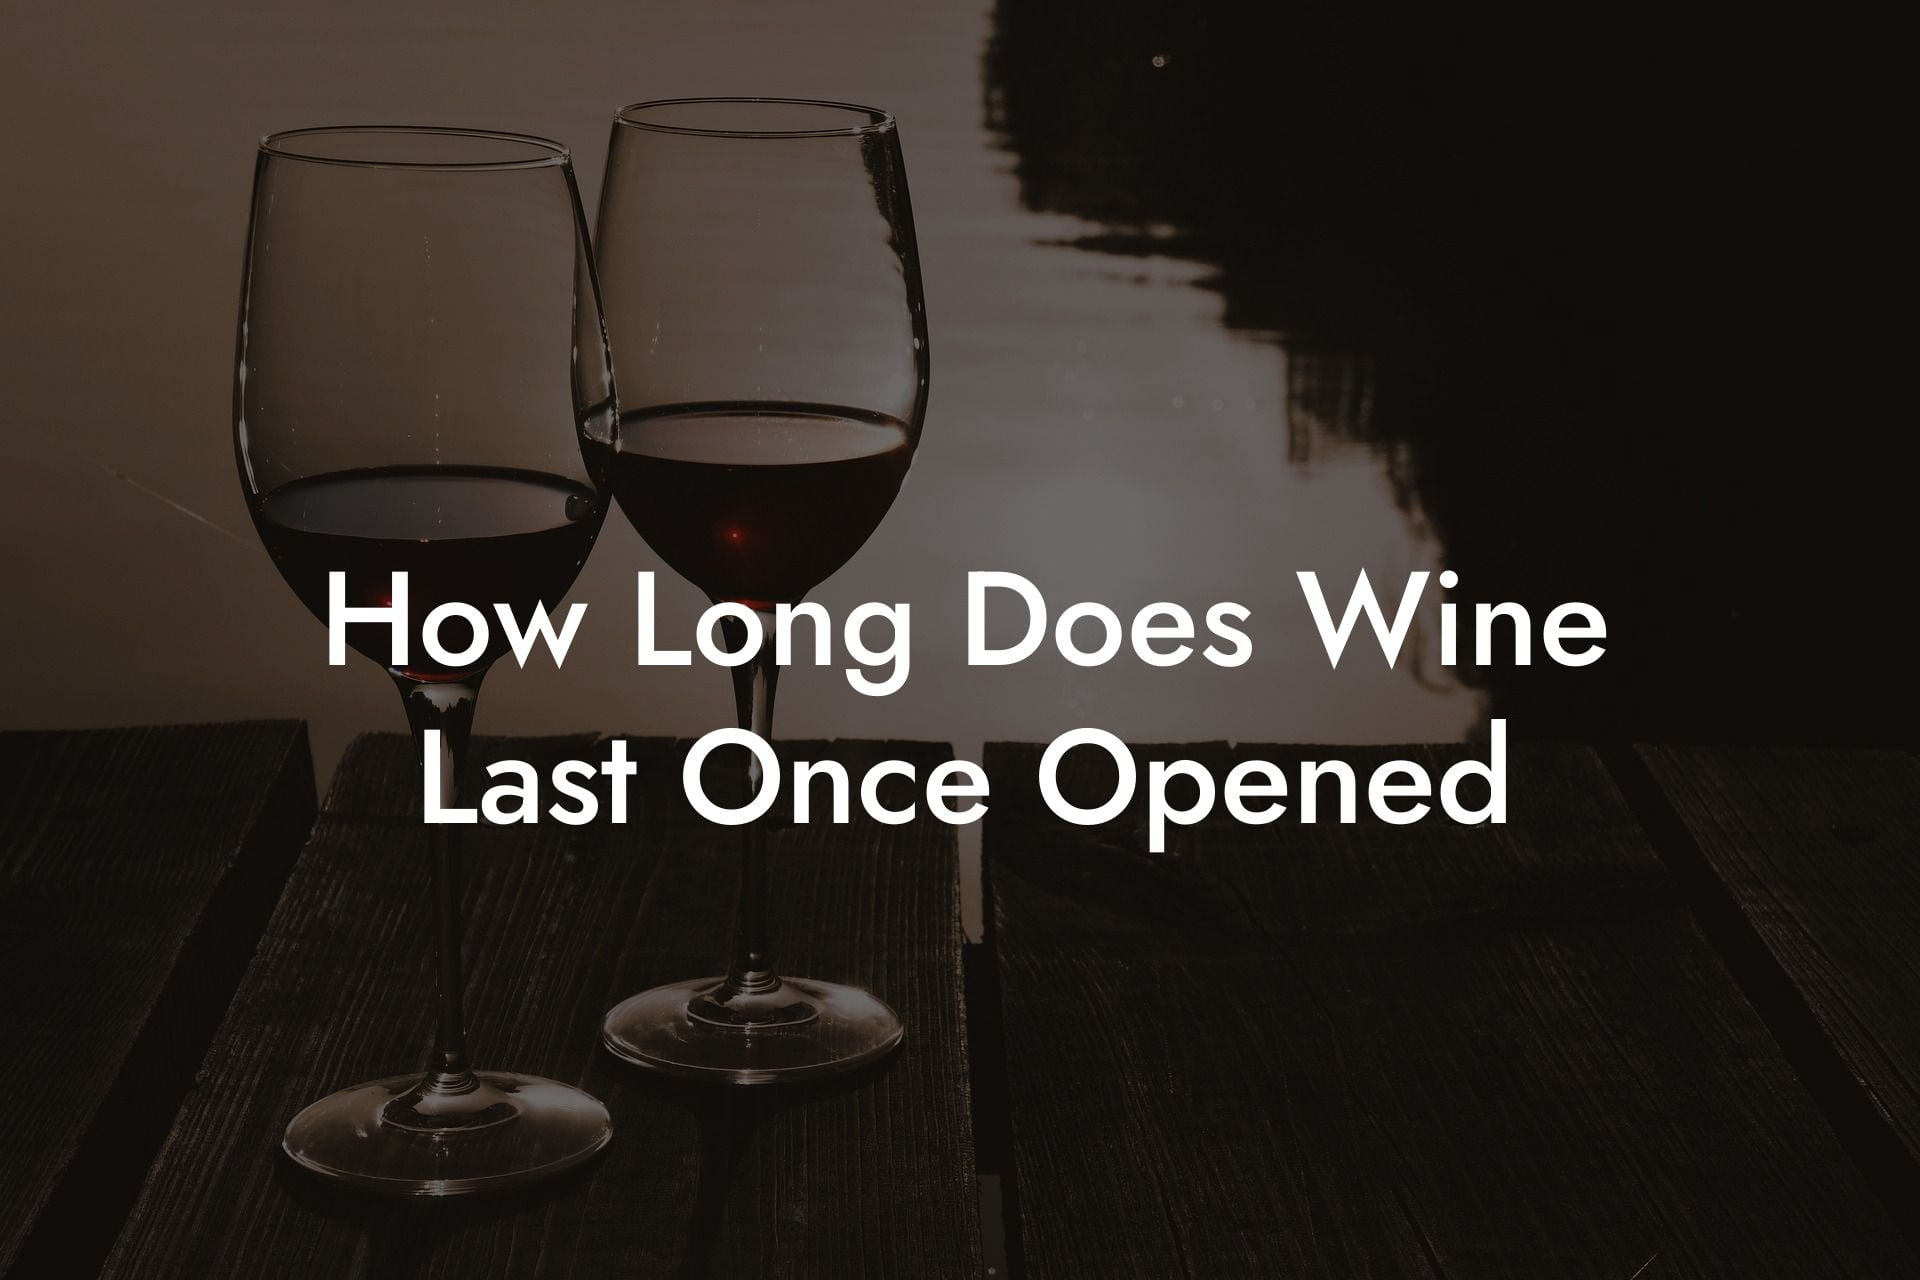 How Long Does Wine Last Once Opened